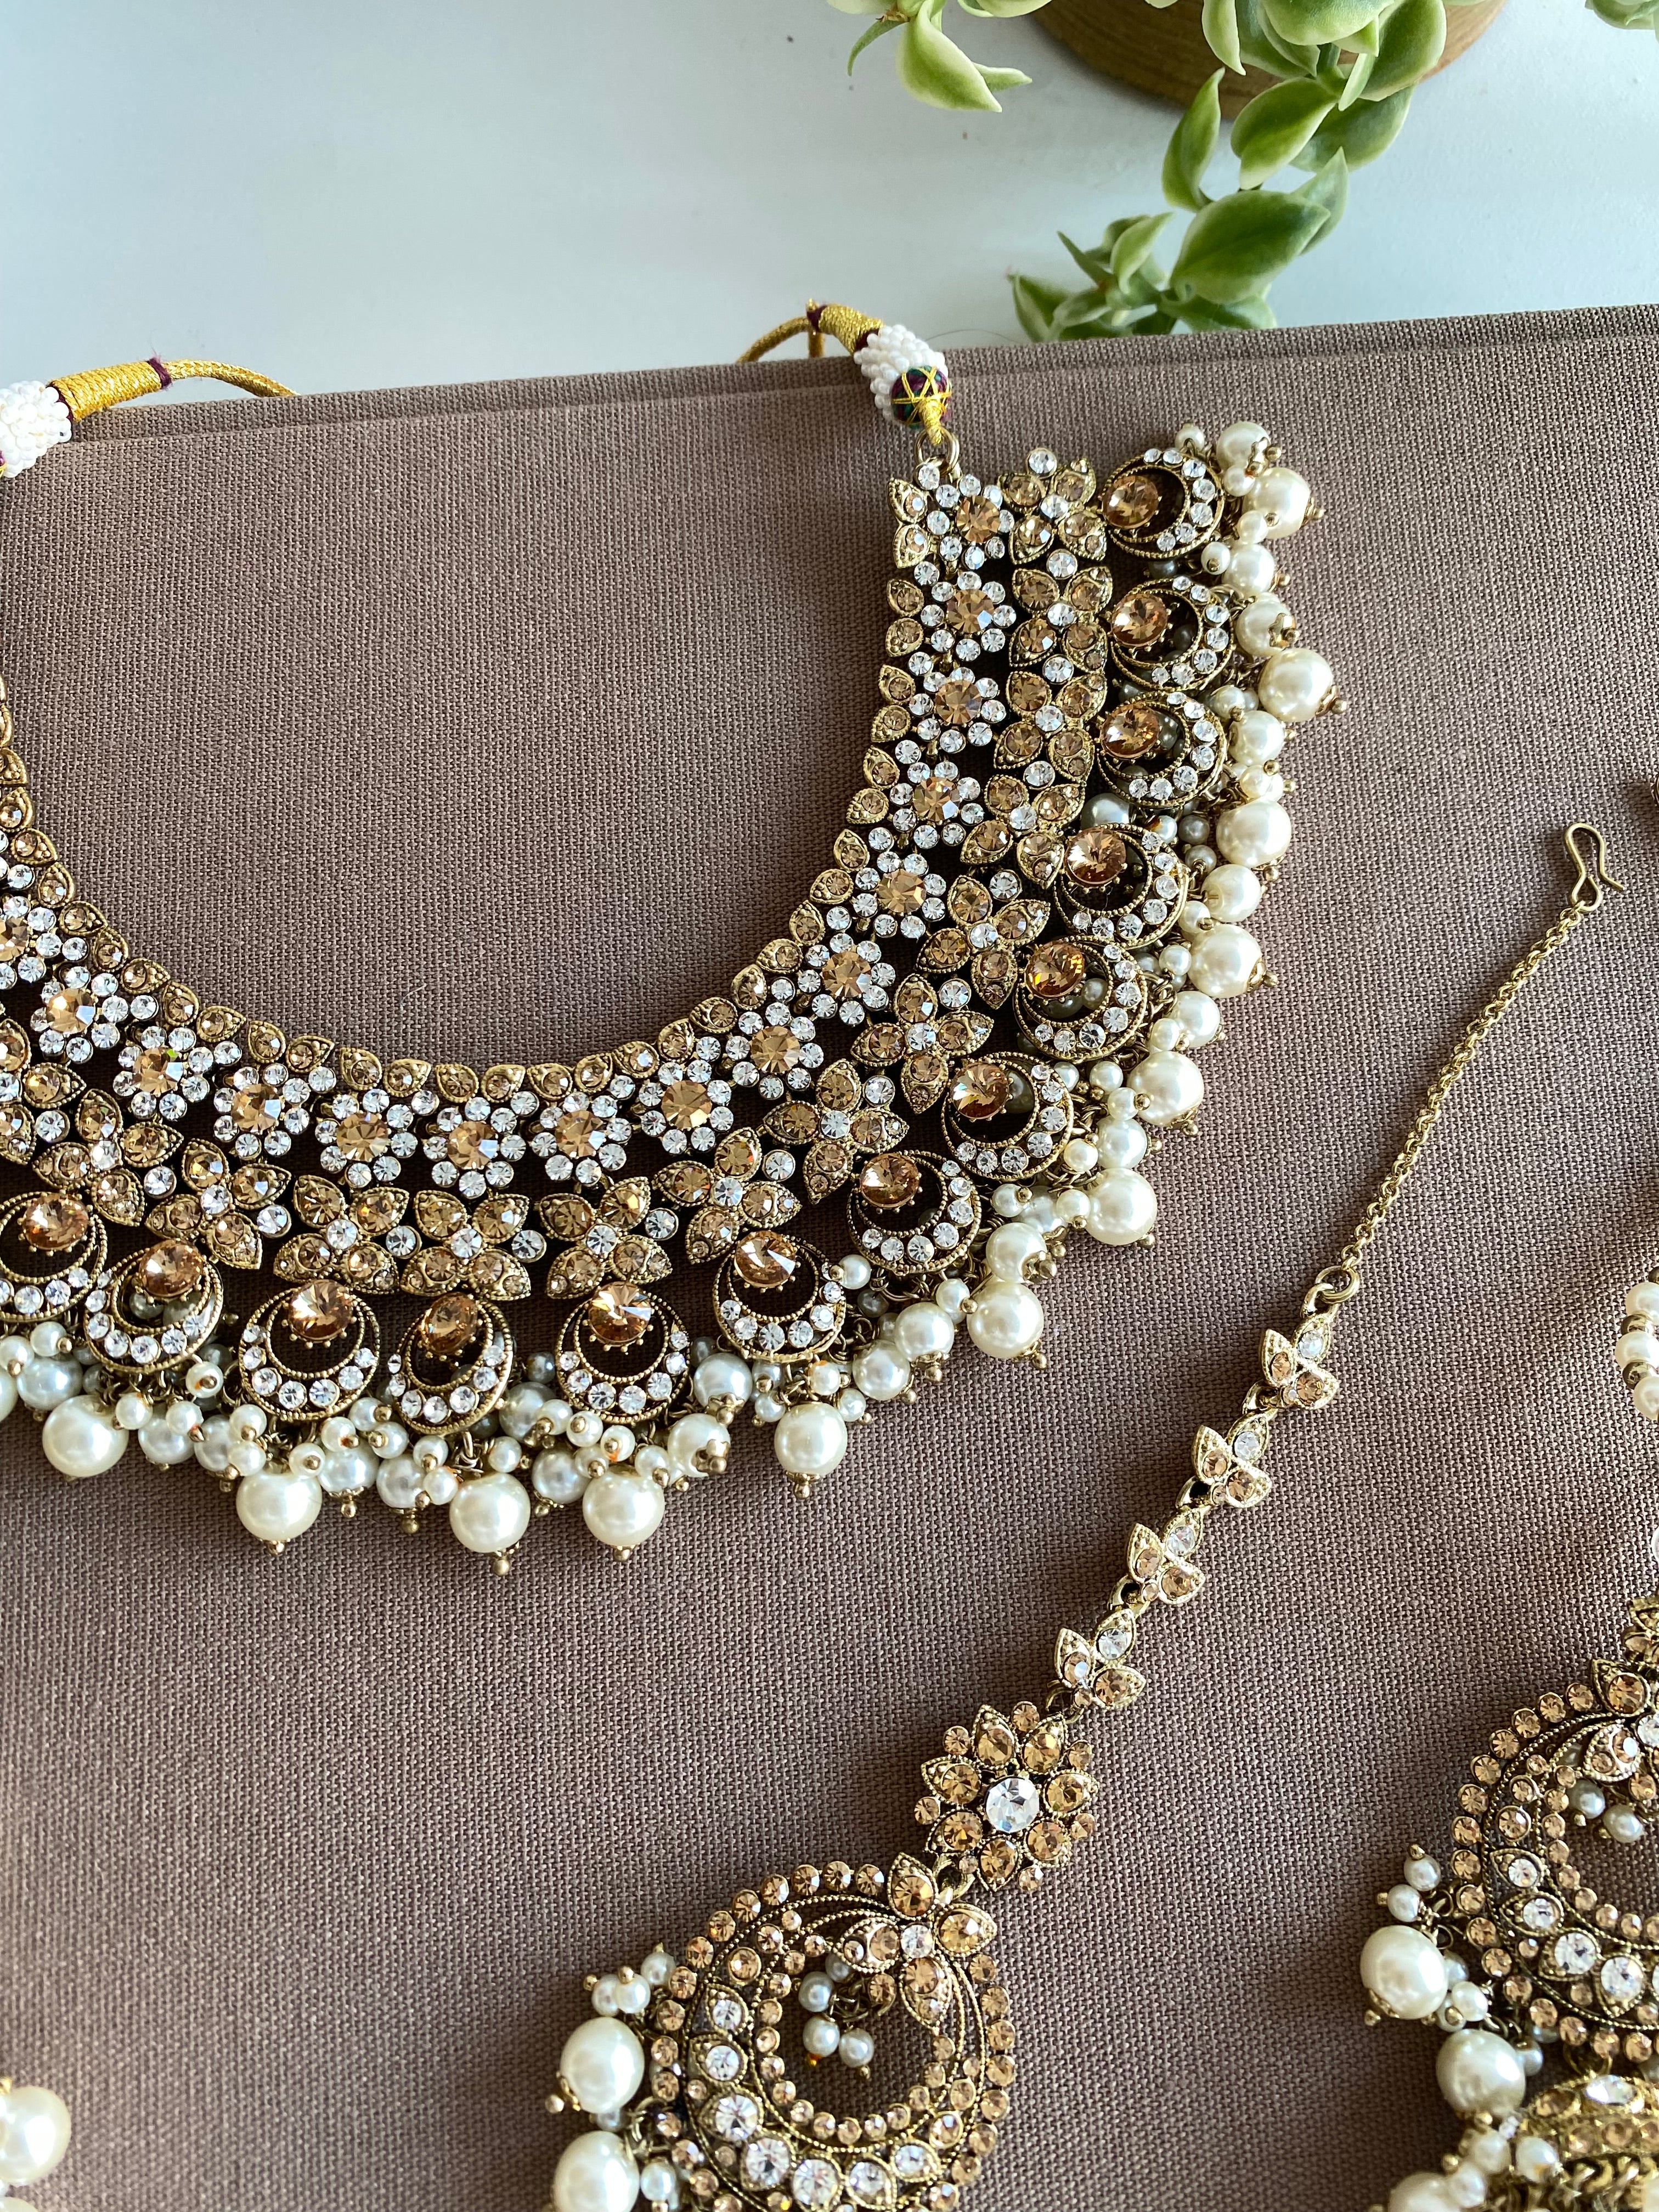 Festive Essentials - Maleena necklace has gold or silver plating with multiple stone and color options. It has a necklace, earrings and tikka. For customization of colors please contact on whatsapp: +1-313-727-1045